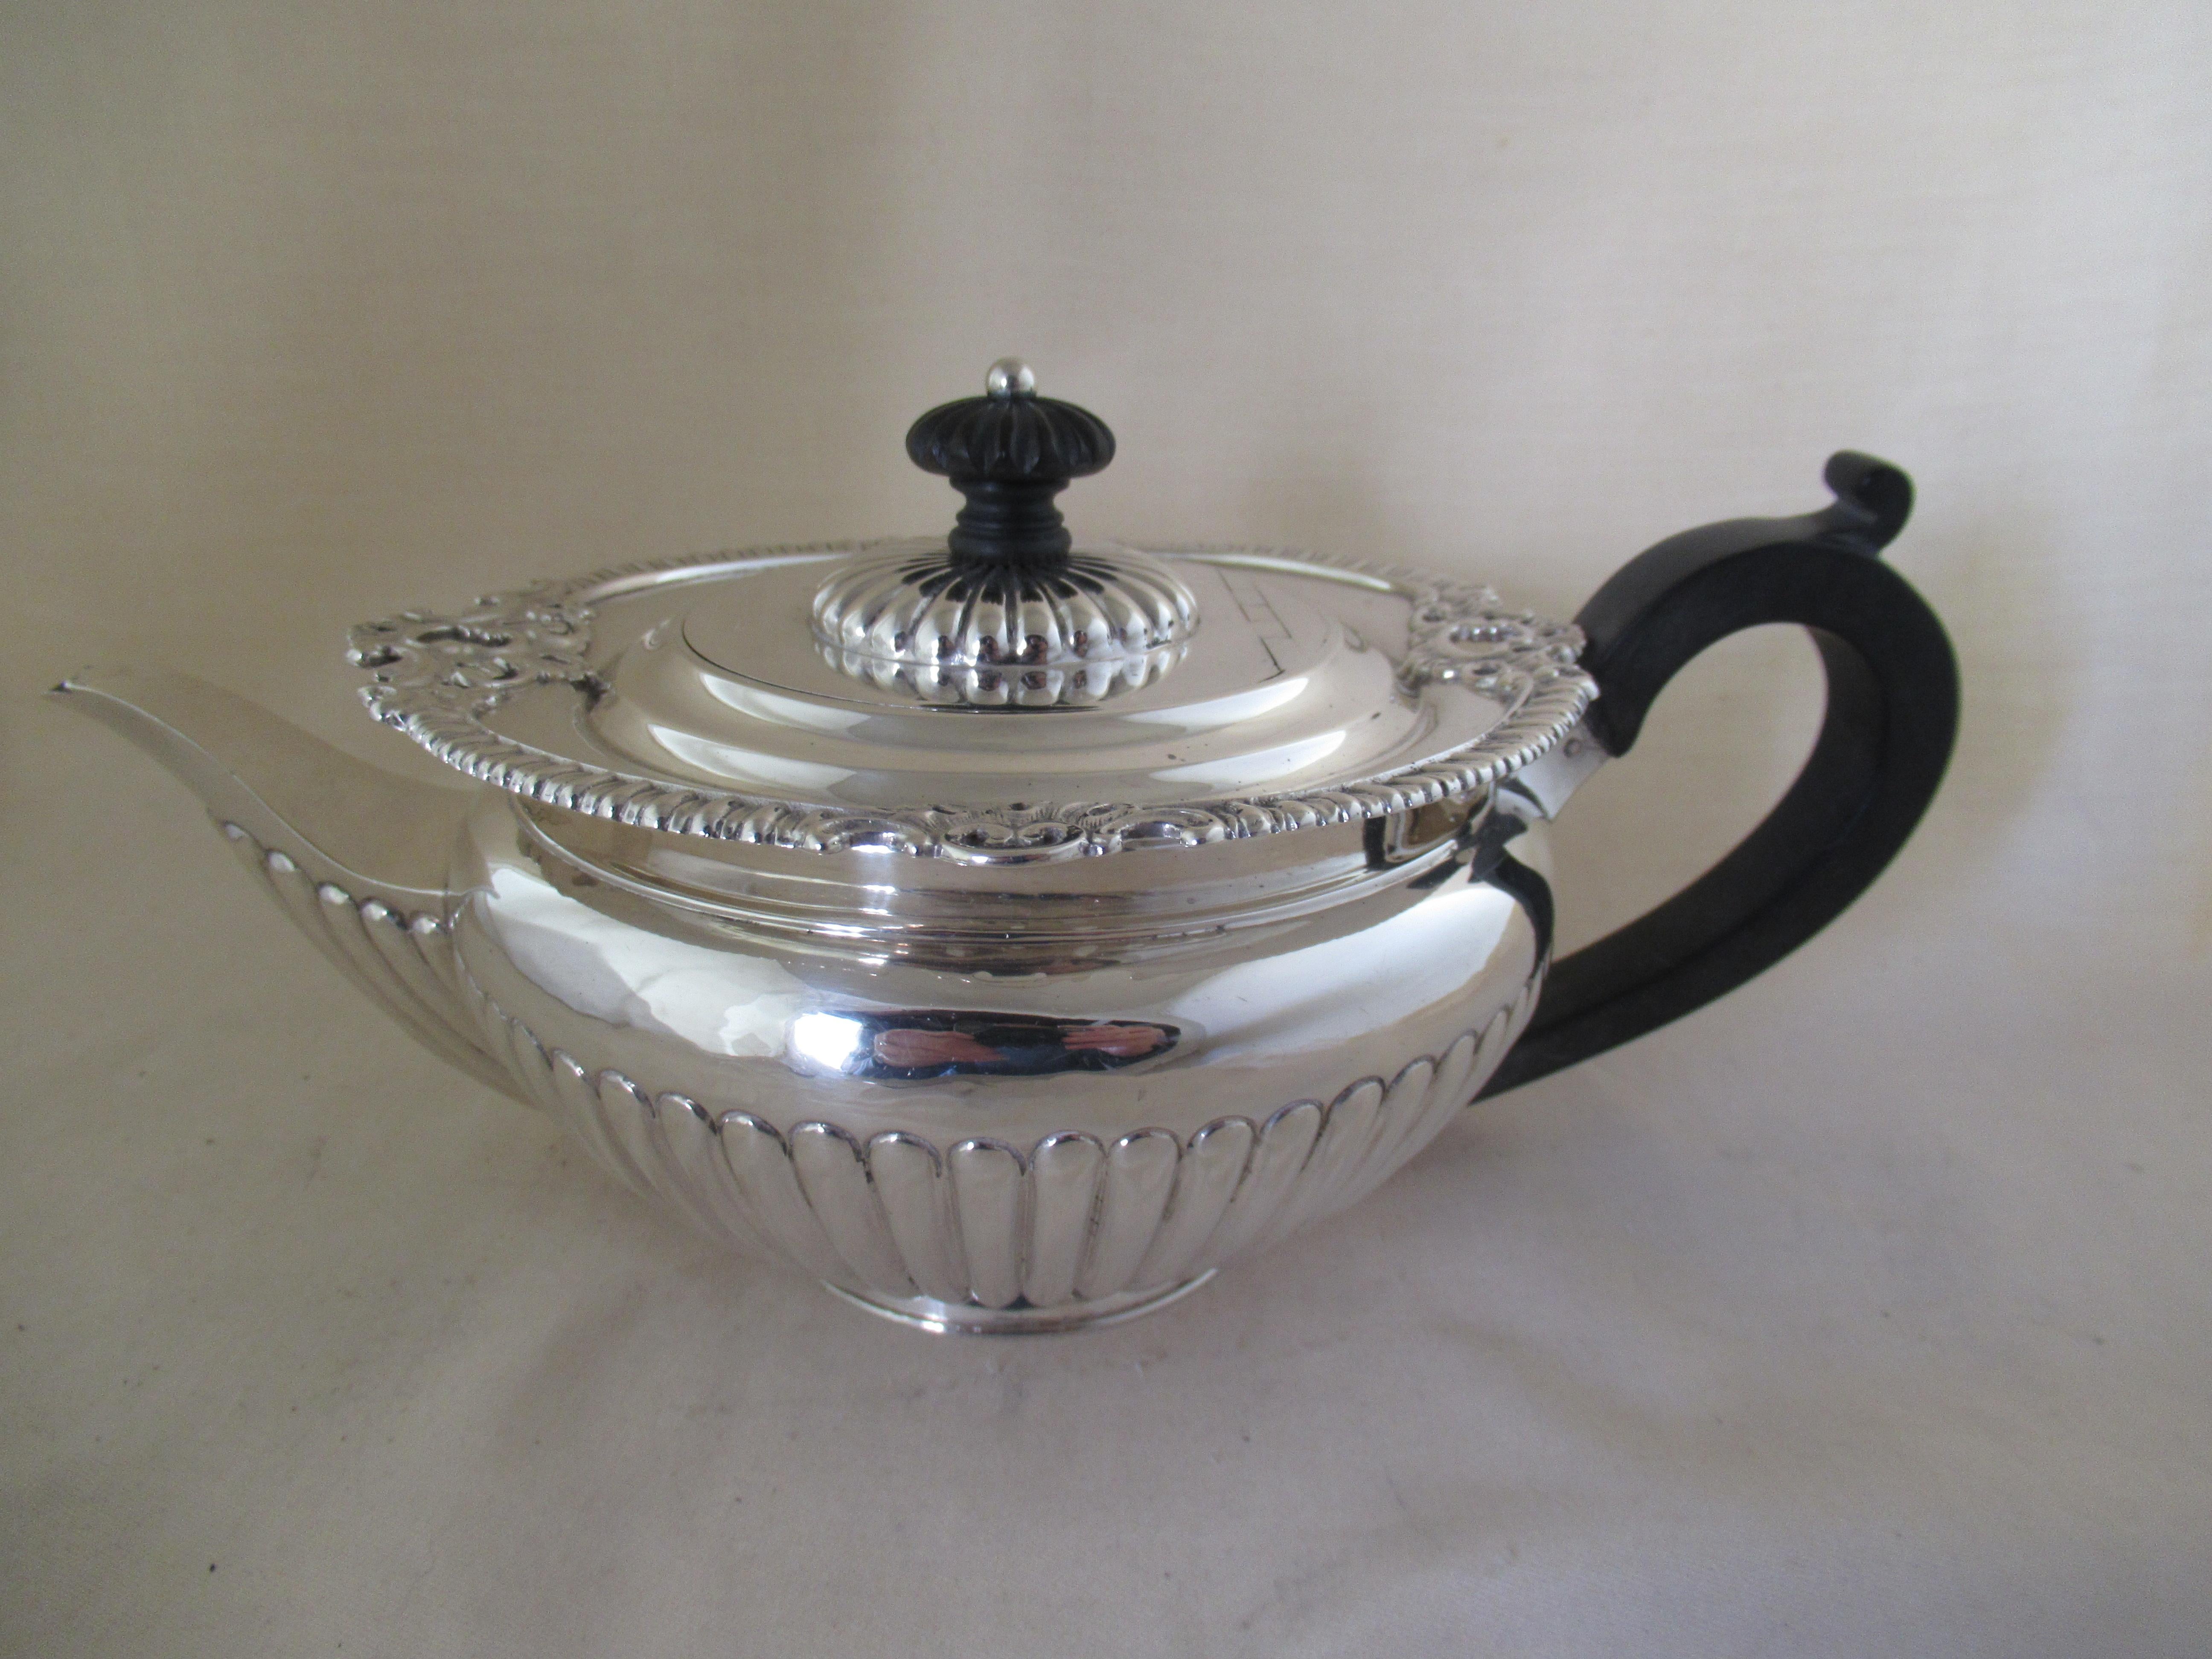 Sterling Silver SUPERB VICTORIAN TEAPOT 
Identified with English Hallmarks, applied by the Birmingham Assay Office.
 
 Hallmarks:- Lion - Sterling silver guarantee 
 Lower case v - Date letter for Birmingham 1895 
 Anchor - Mark of the